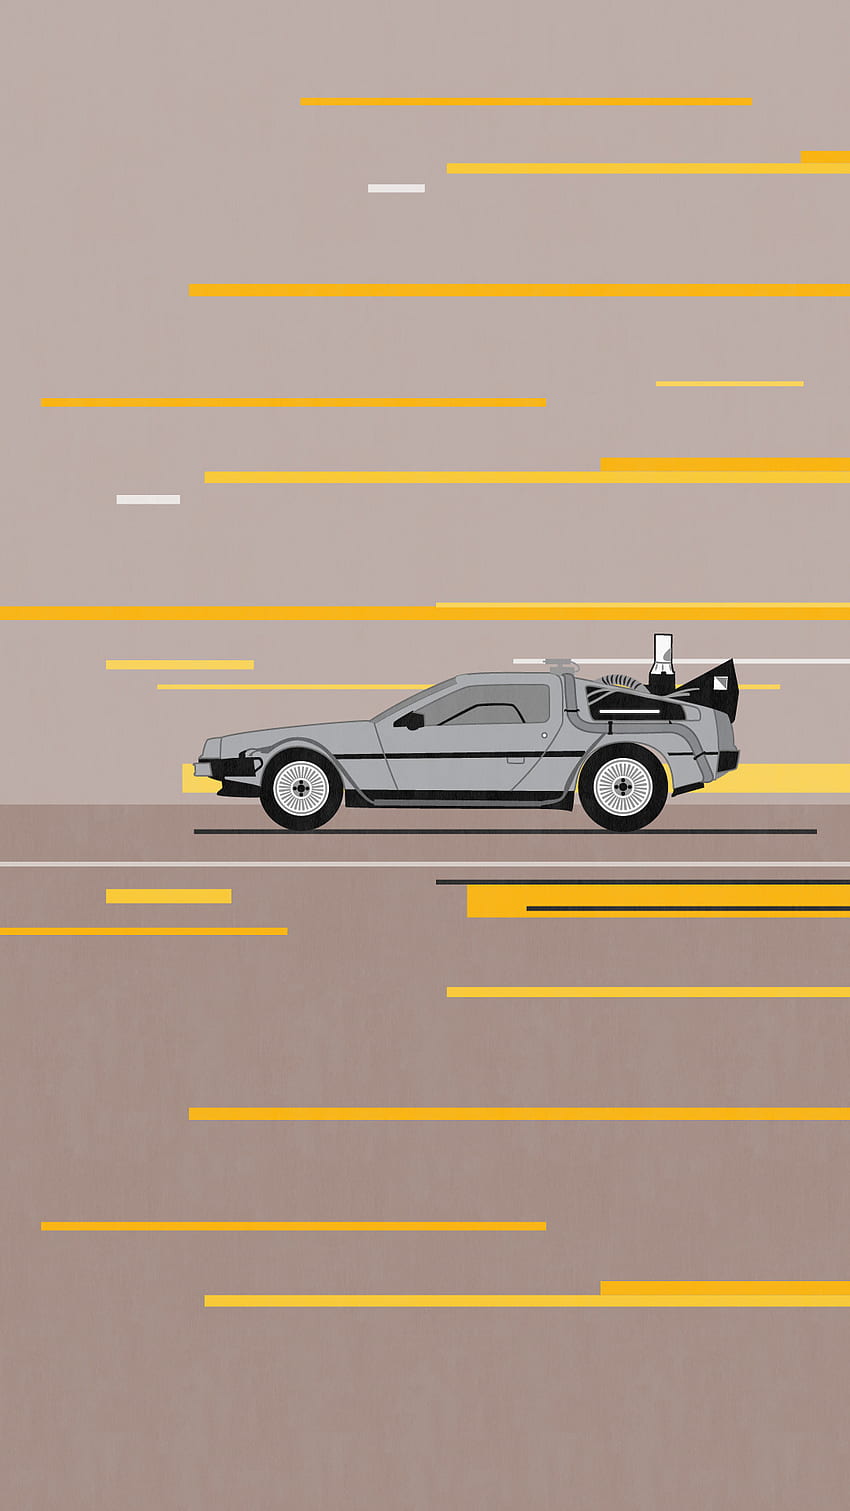 DeLorean Wallpaper  Back To The Future Day 2021 by KineSight on DeviantArt